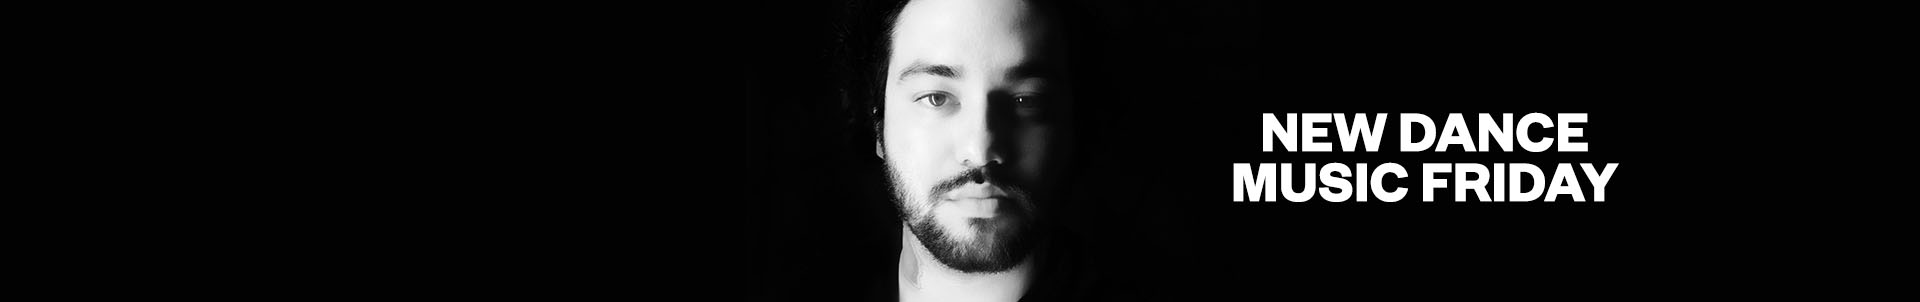 Exclusive interview: New Dance Music Friday with Deorro